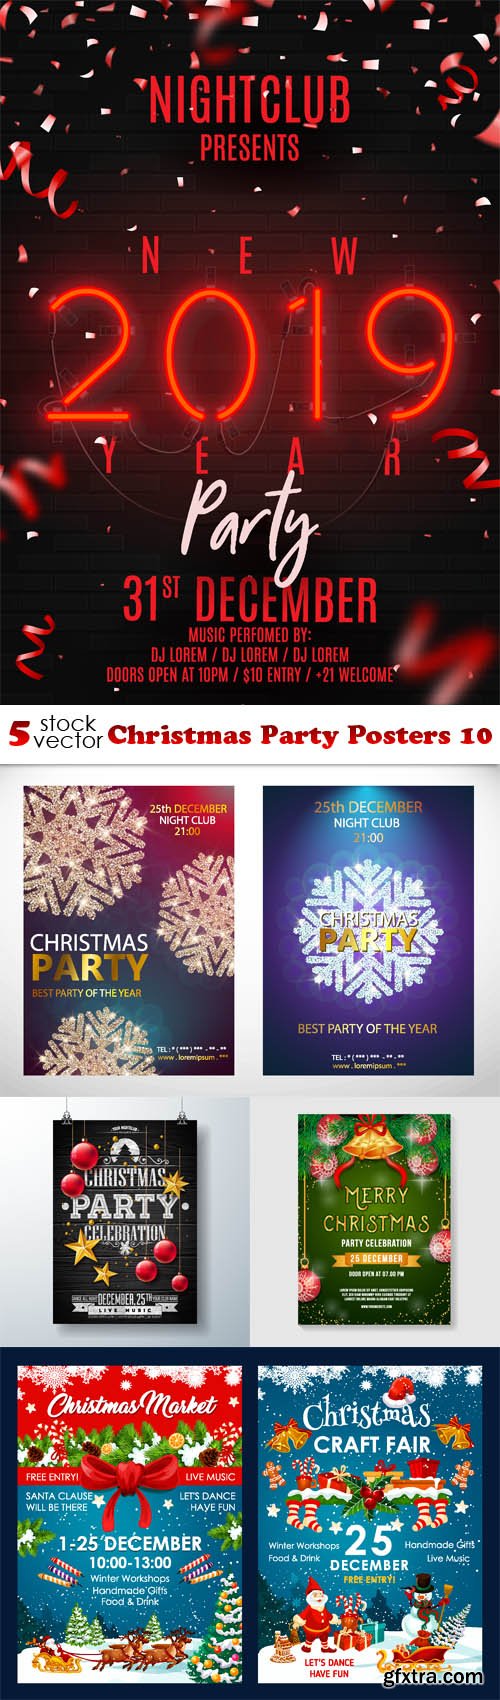 Vectors - Christmas Party Posters 10